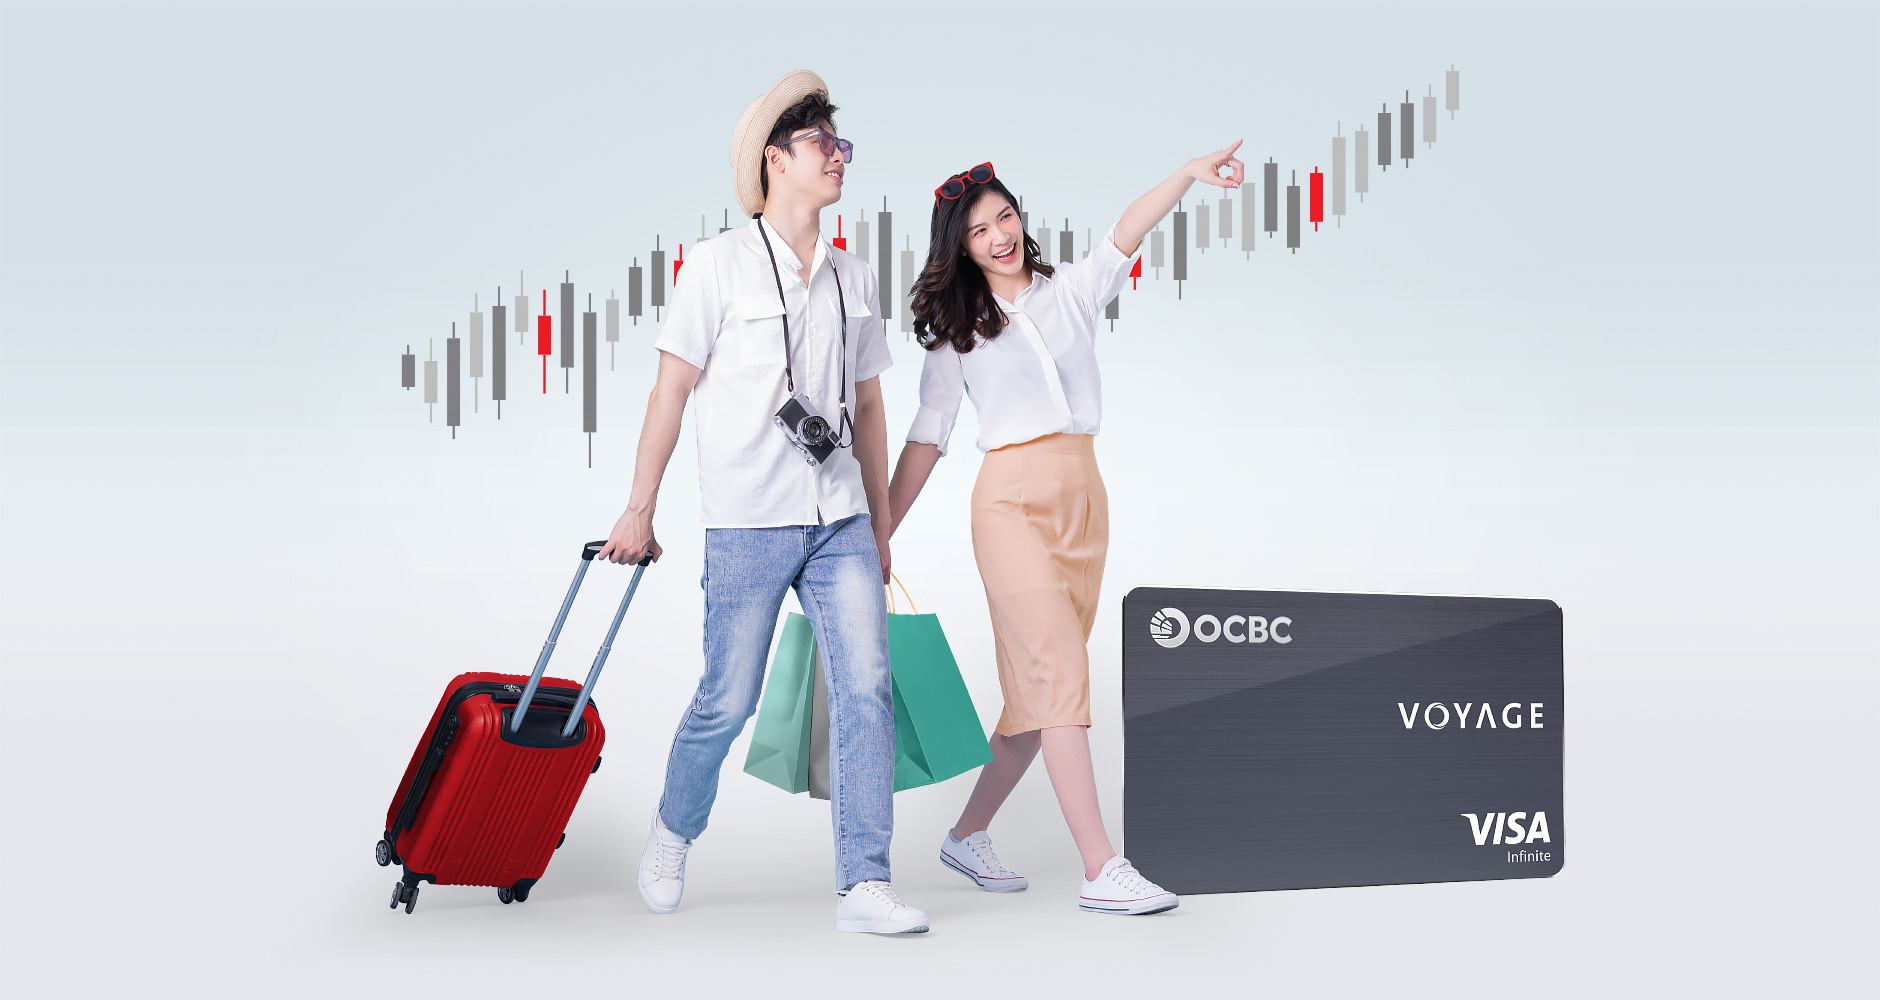 Earn up to 90,000 VOYAGE Miles when you apply for VOYAGE card and trade via the Online Equities Account